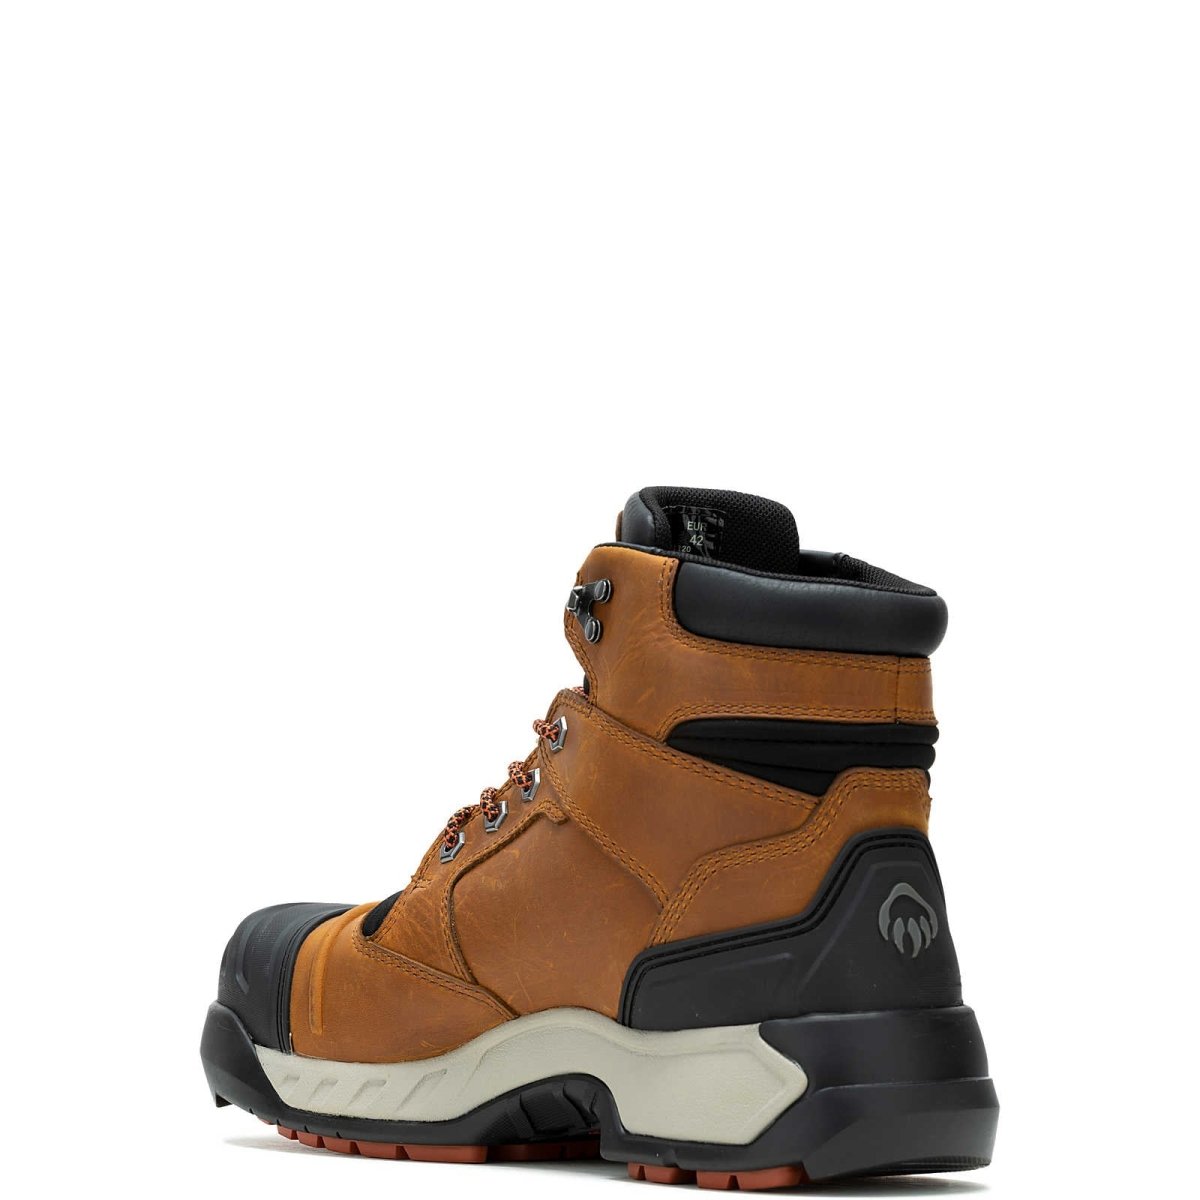 WOLVERINE DS TORQUE MEN'S WORK BOOT (W231120) IN COPPER - TLW Shoes